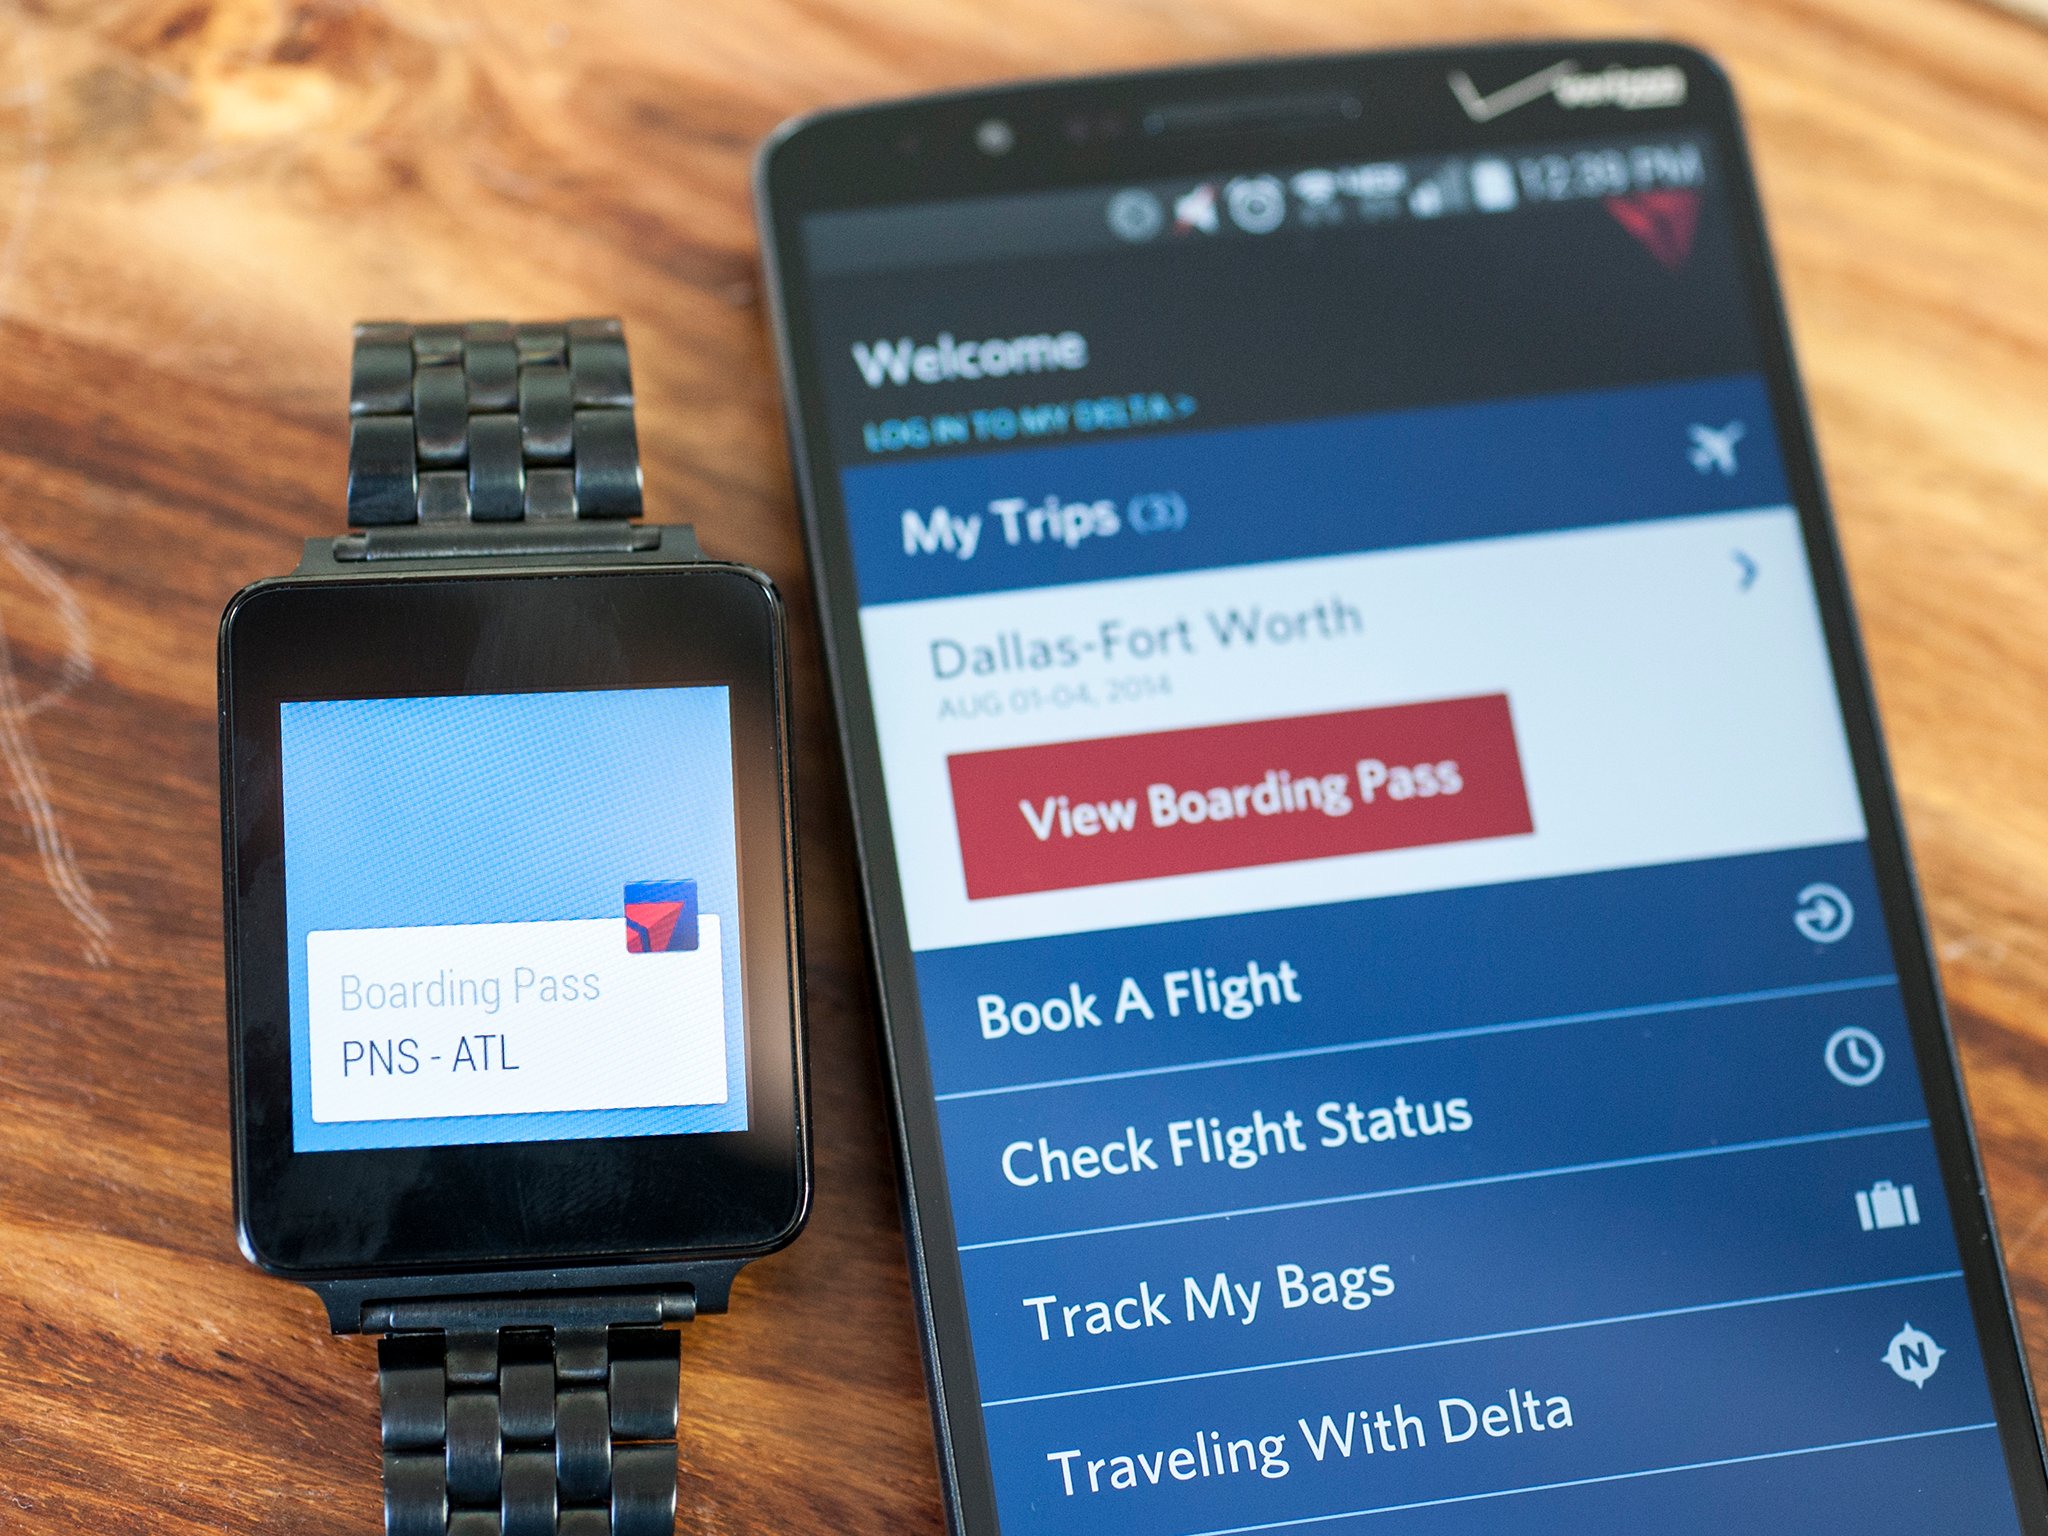 Hey, look. I have a mobile boarding pass available. On my watch.